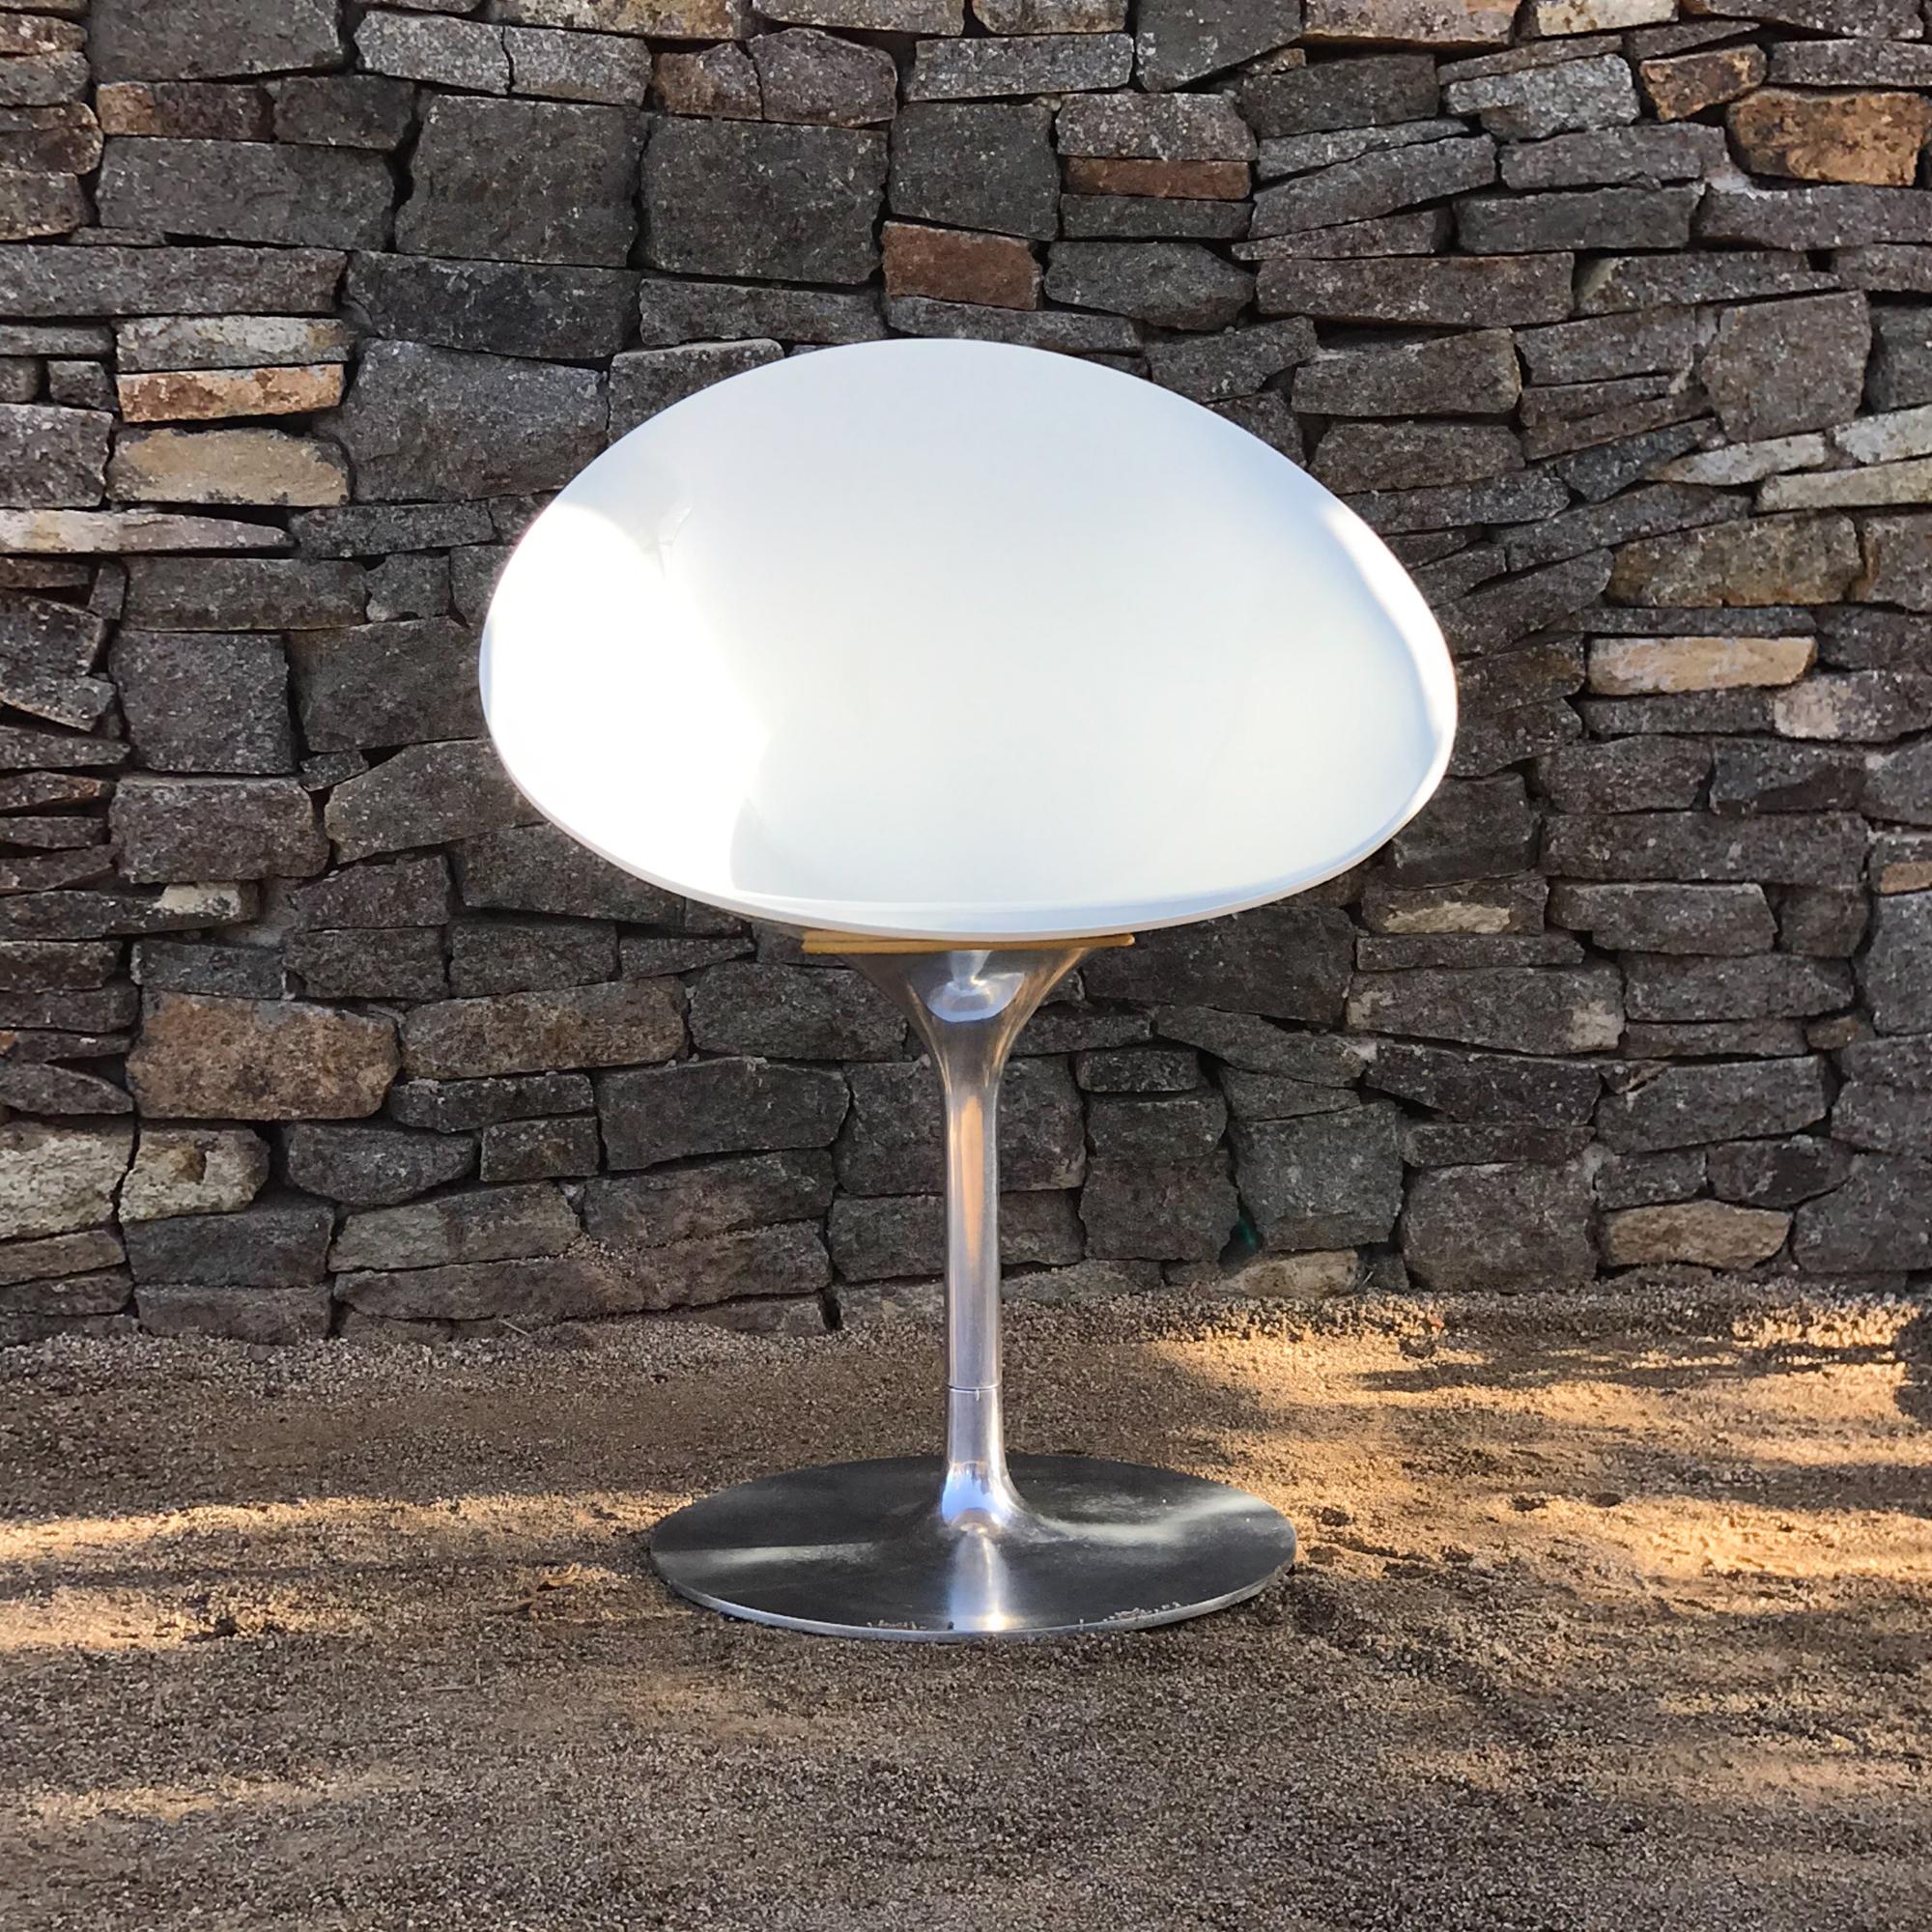 Fabulous modern set of six dining chairs designed by Philippe Starck for Kartell, maker stamped, made in Italy.
White plastic bucket swivel seat with chrome-plated tulip base. Italy stamped. (*Please note we have an additional chair available if